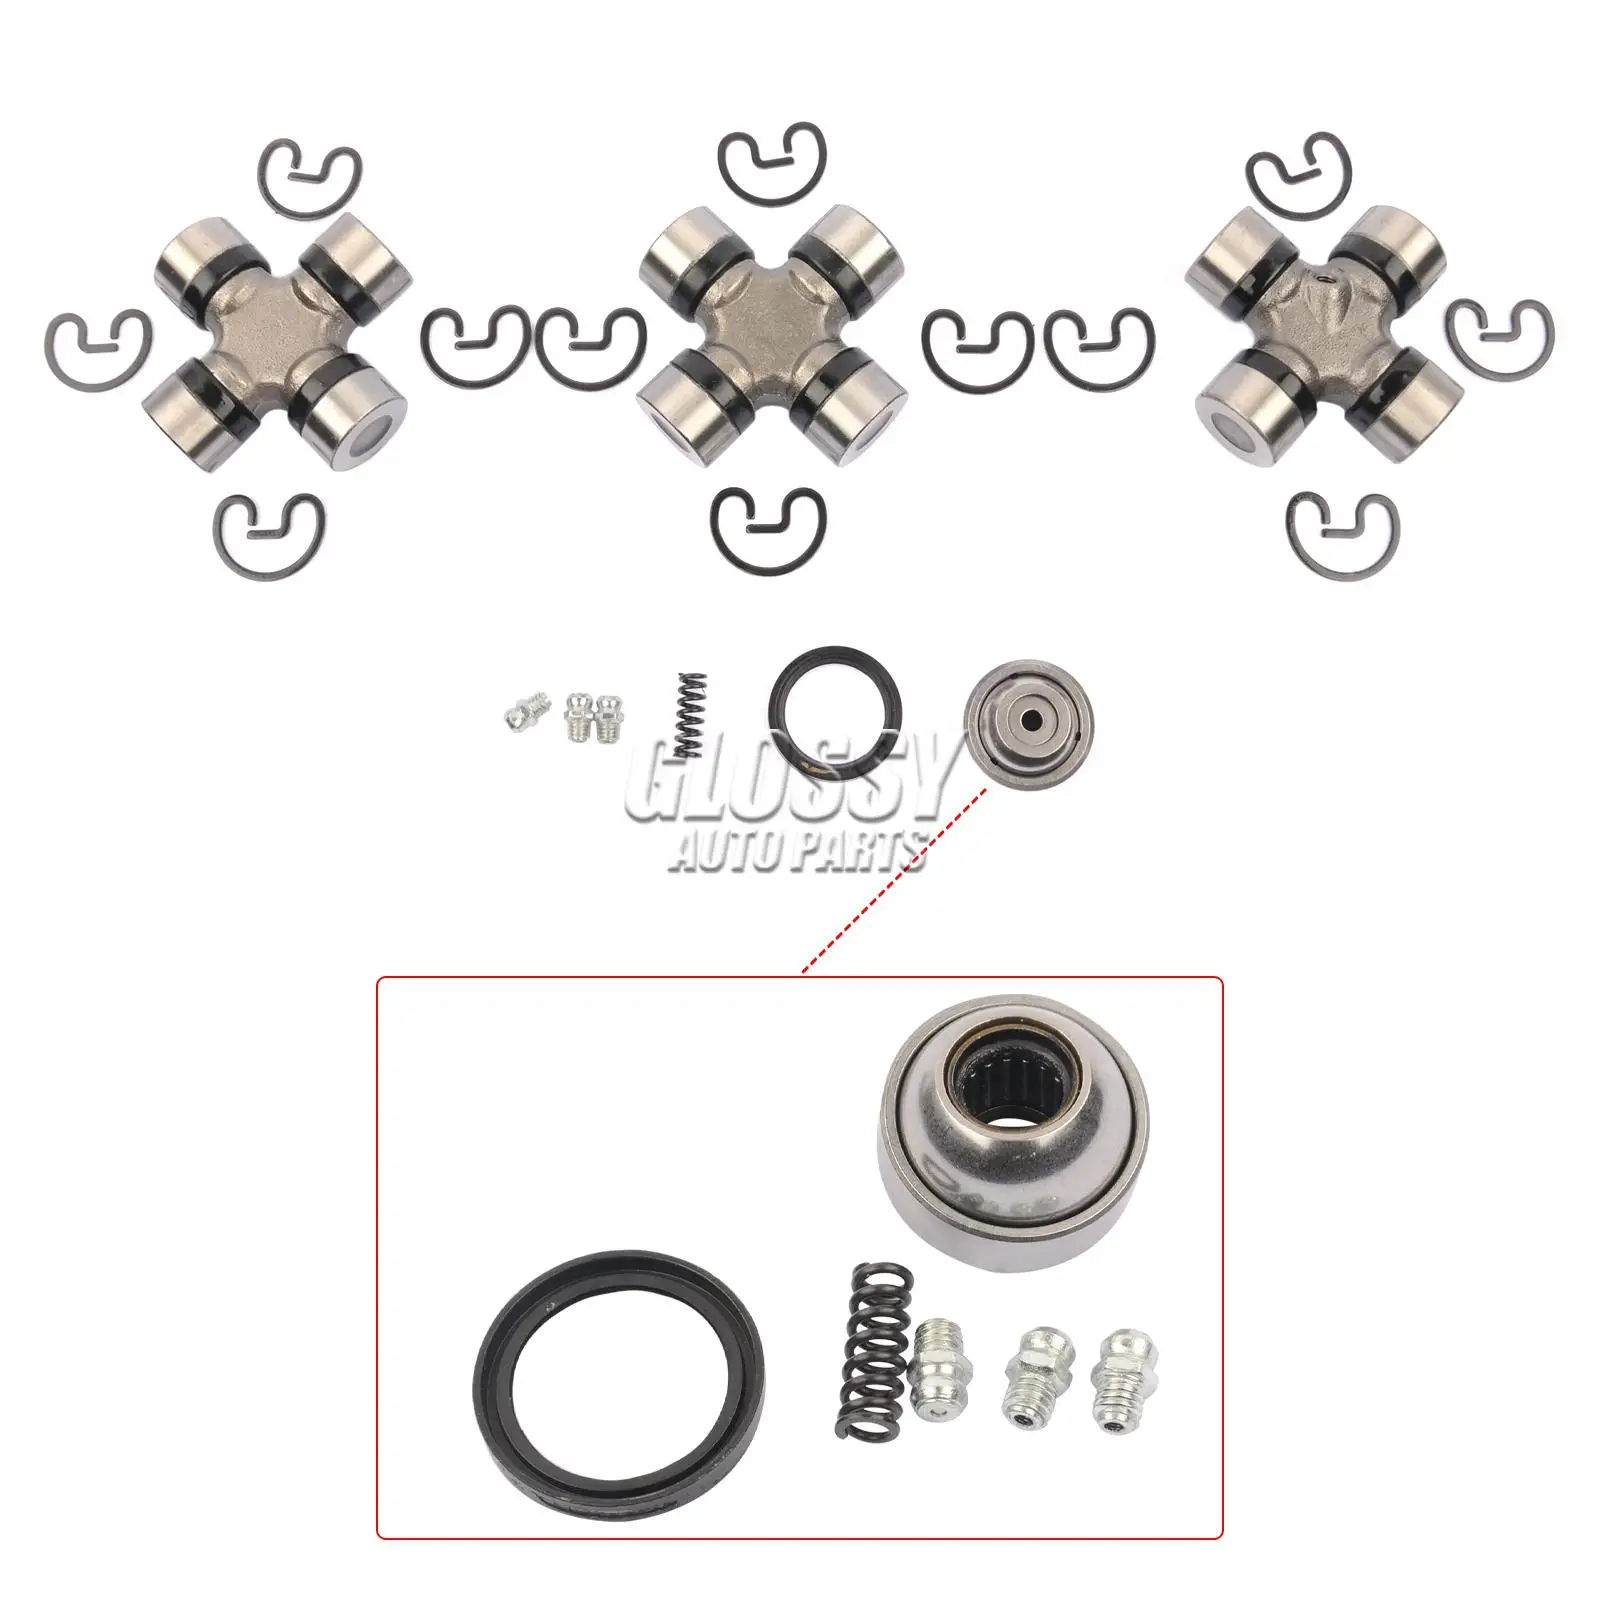 

AP03 Front Prop Propshaft Shaft Double Cardan Joint Repair Kit For Land Rover Discovery 2 MK2 TD5 TVC100010 TVB000100 DA1277